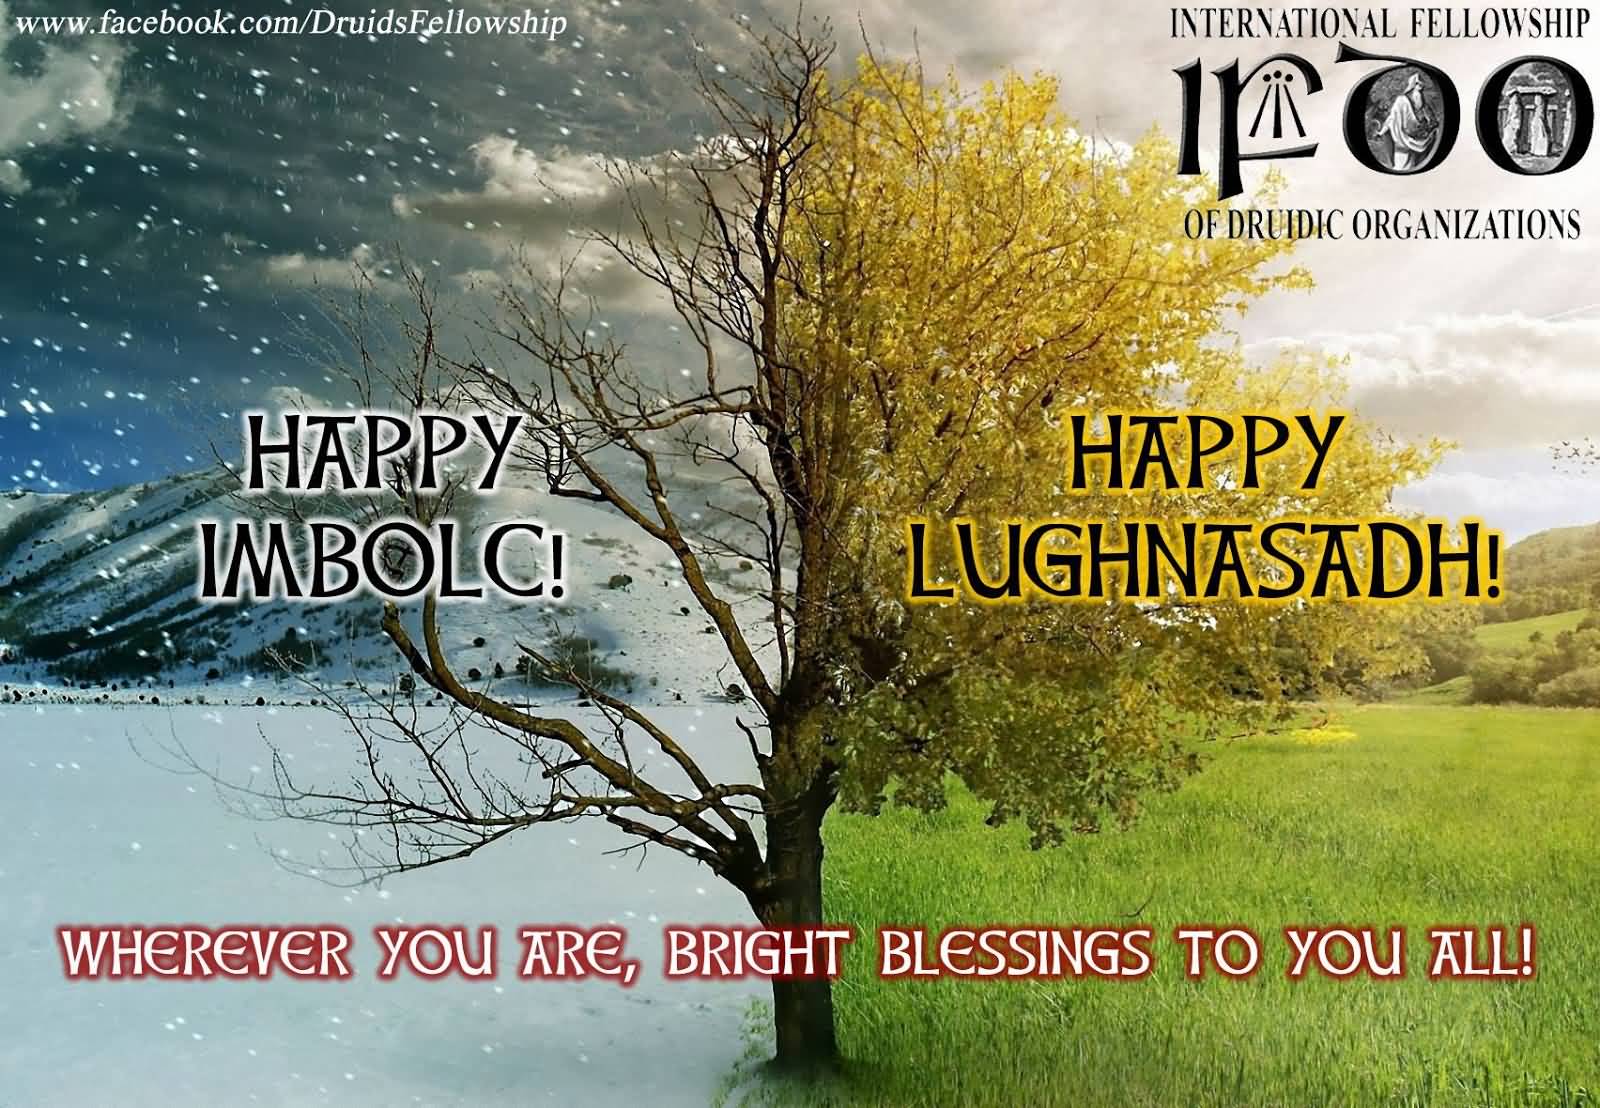 Happy Imbolc Happy Lughnasagh Wherever You Are Brigt Blessings To You All